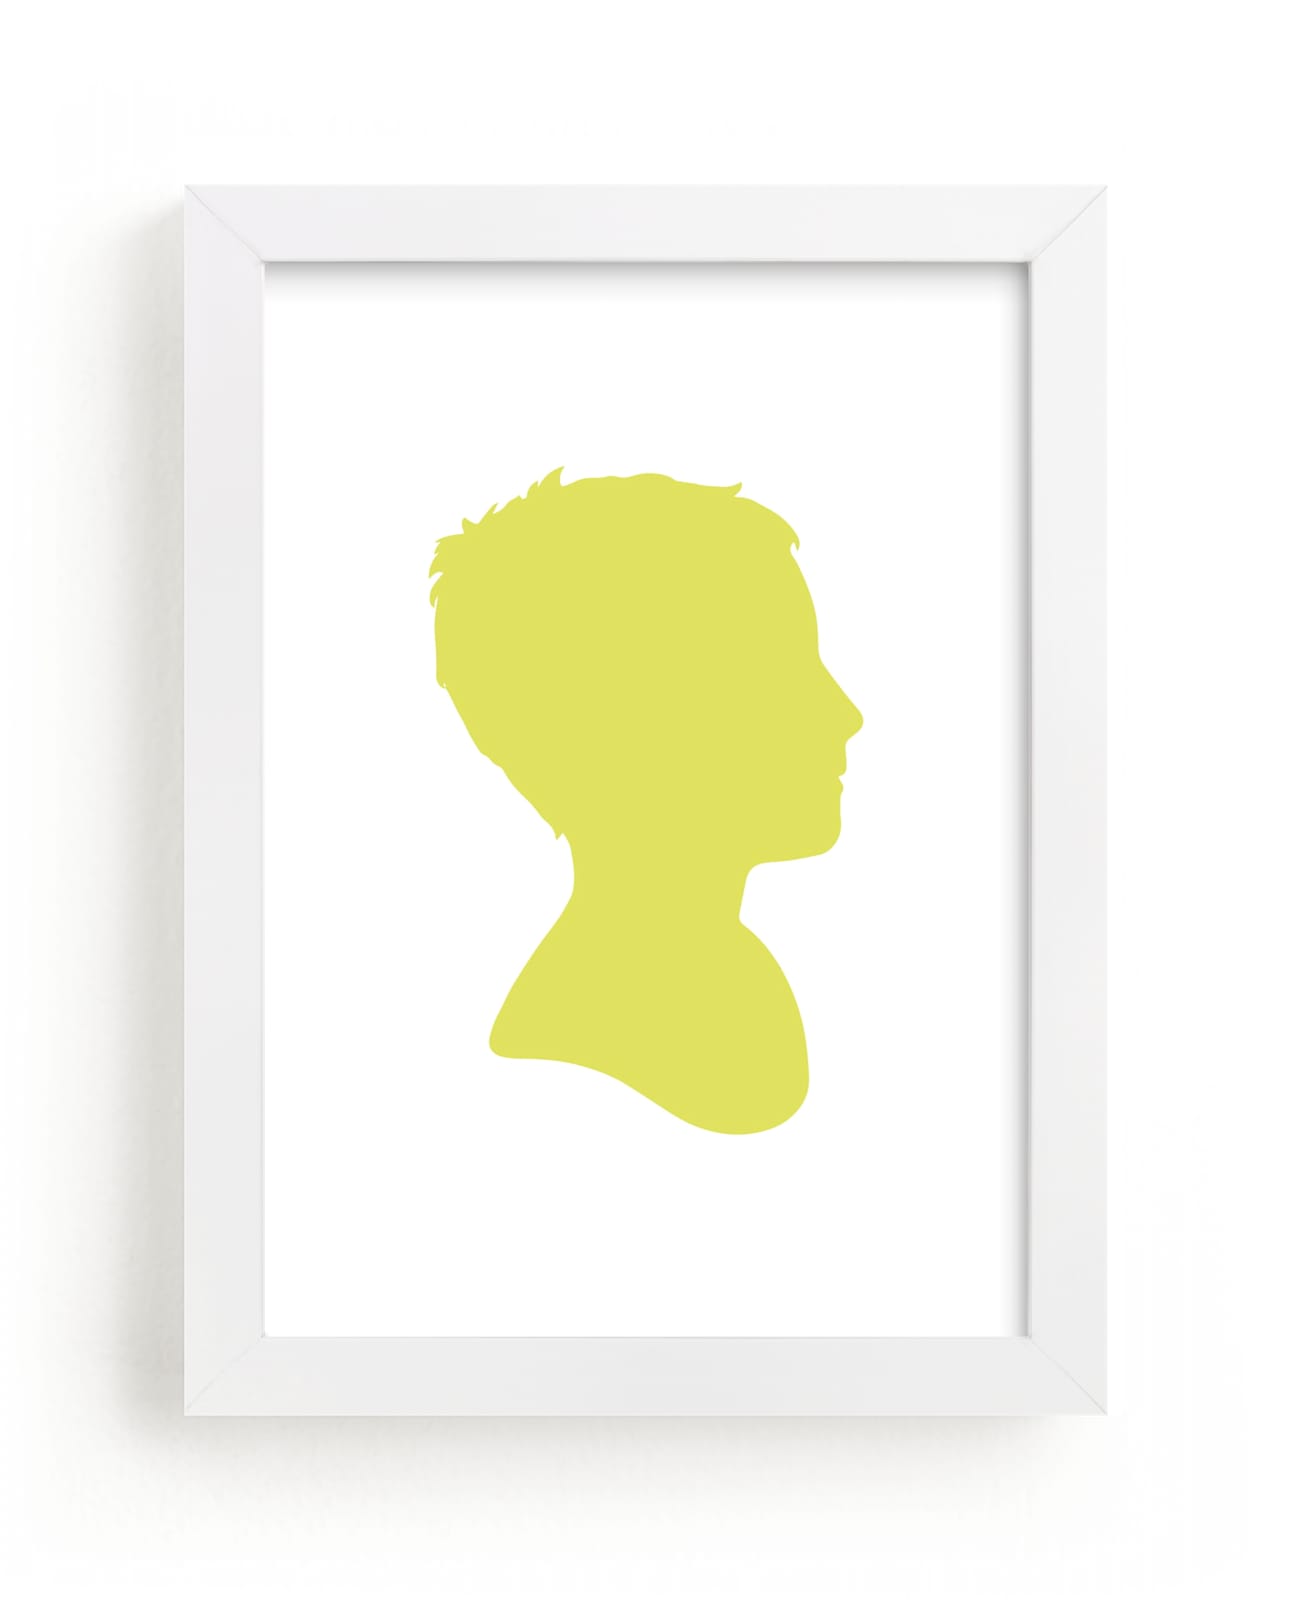 This is a yellow silhouette art by Minted called Custom Silhouette Art.